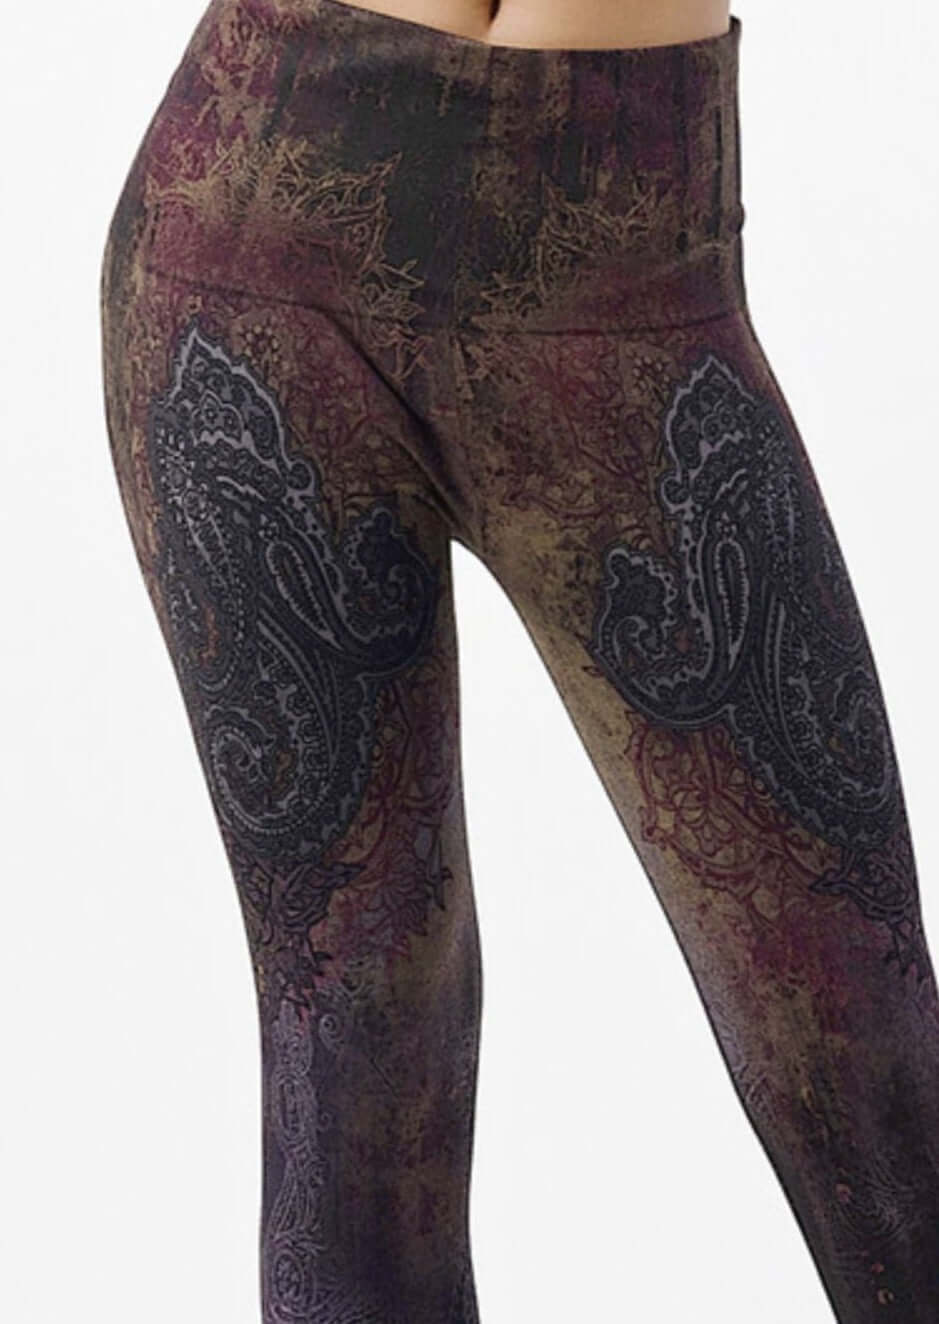 M. Rena Ladies High Waist Tummy Control Printed Paisley Leggings | Made in USA | Deep Fall Colors of Amber, Wine, Gold, Black & Gray | Made in America Boutique